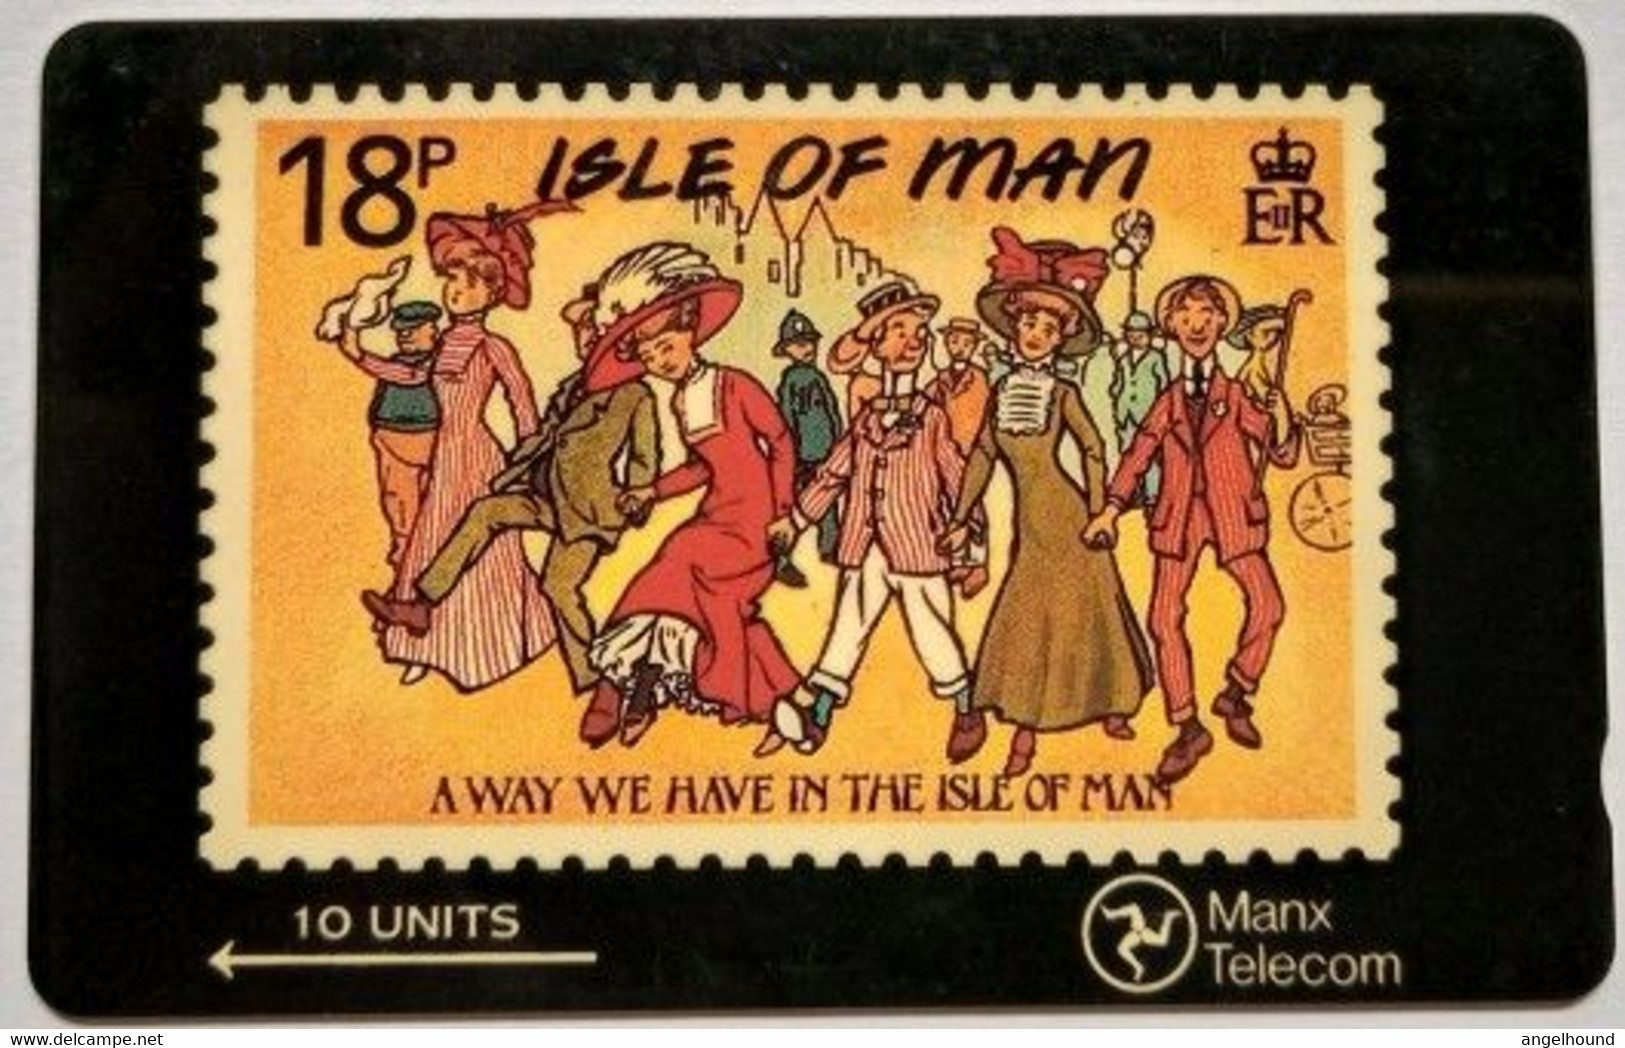 Isle Of Man 18p  6IOMB  10 Units " A Way We Have In The Isle Of Man " - Man (Isle Of)